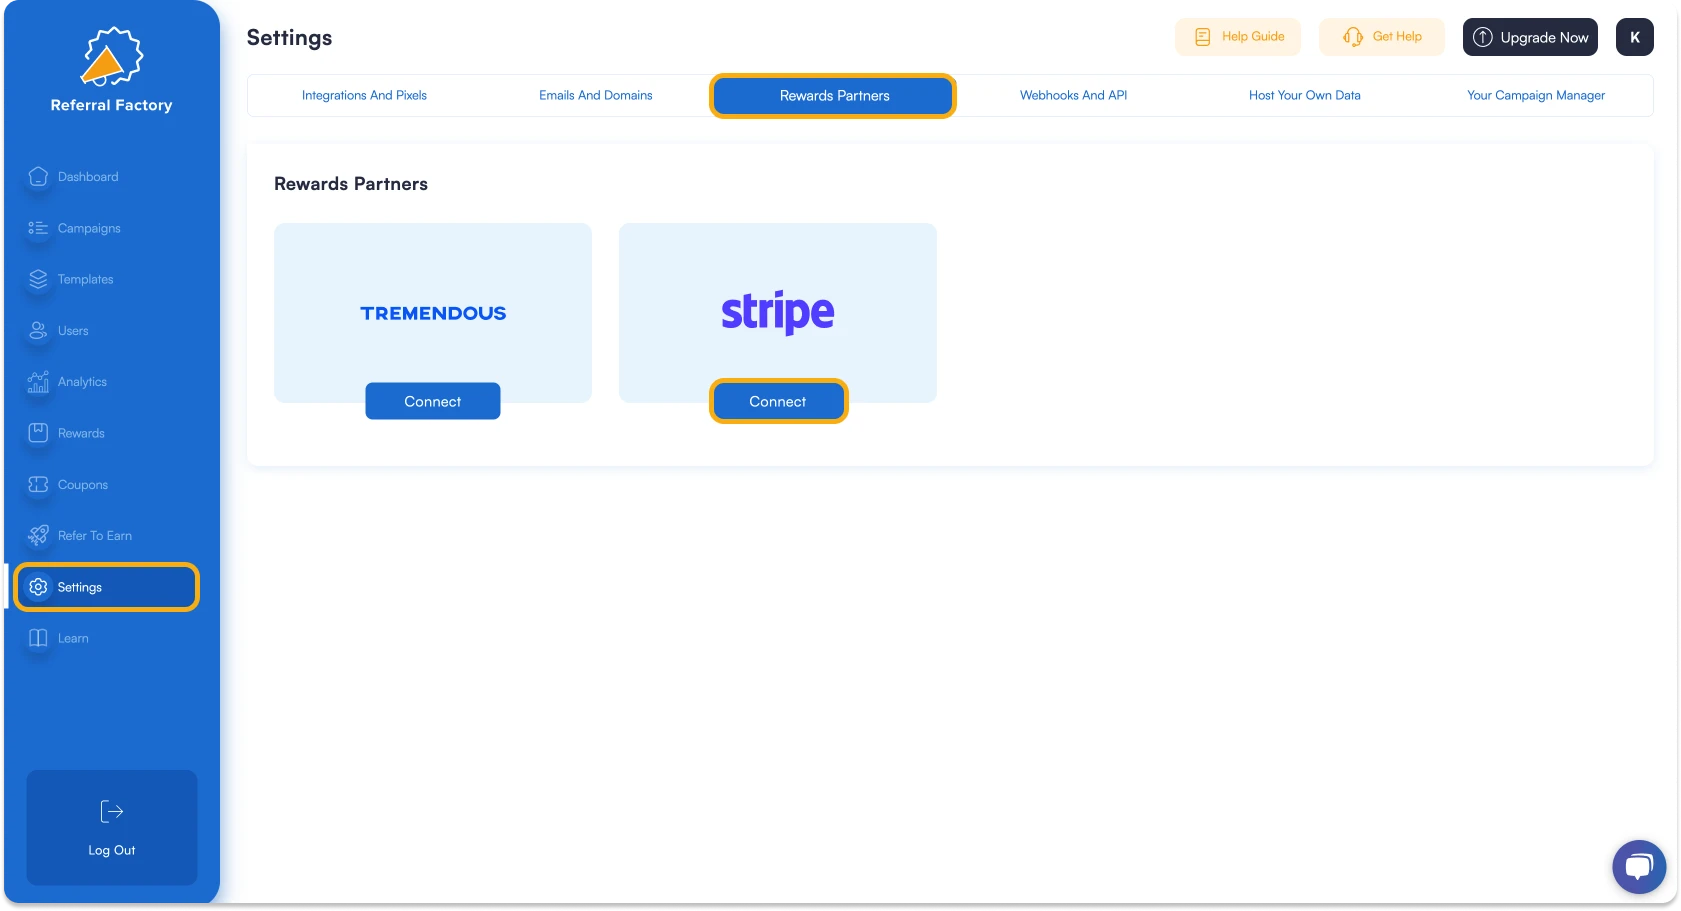 Screenshot showing how in Referral Factory connect Stripe to your referral program software.